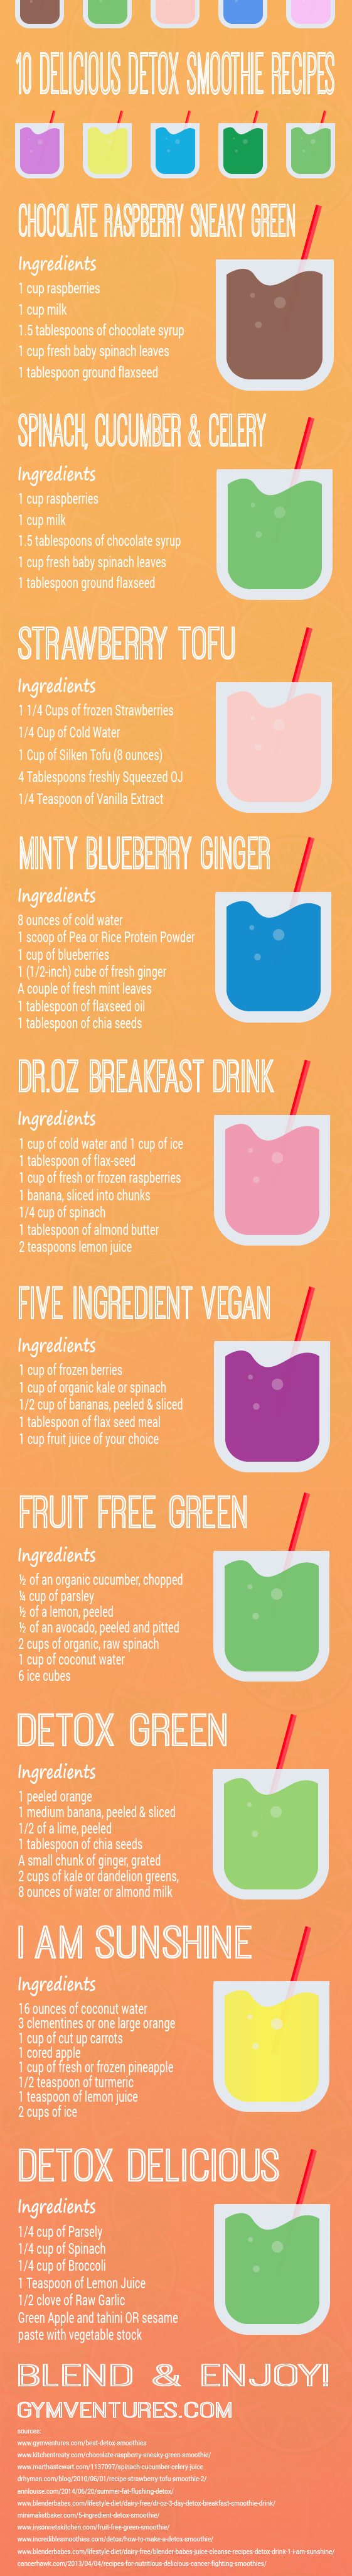 10 Smoothie Recipes With Detox Effect And Delicious Taste Infographic